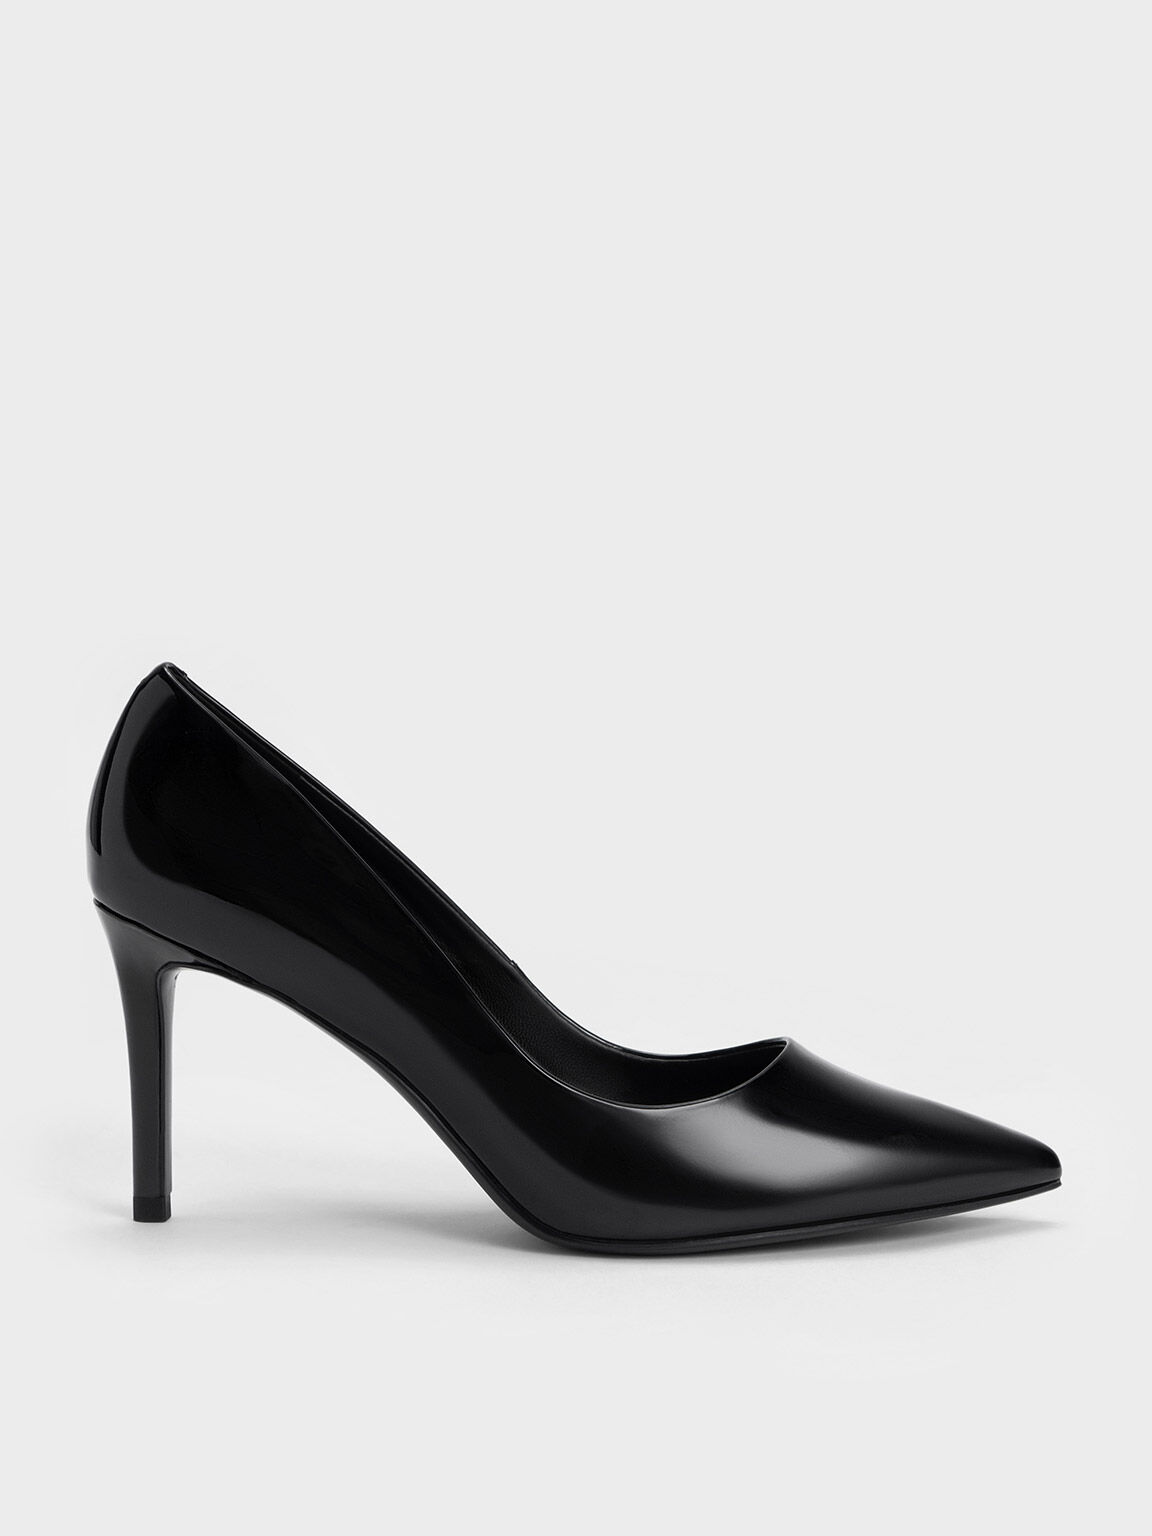 Black Patent Emmy Patent Pointed Toe Stiletto Pumps CHARLES  